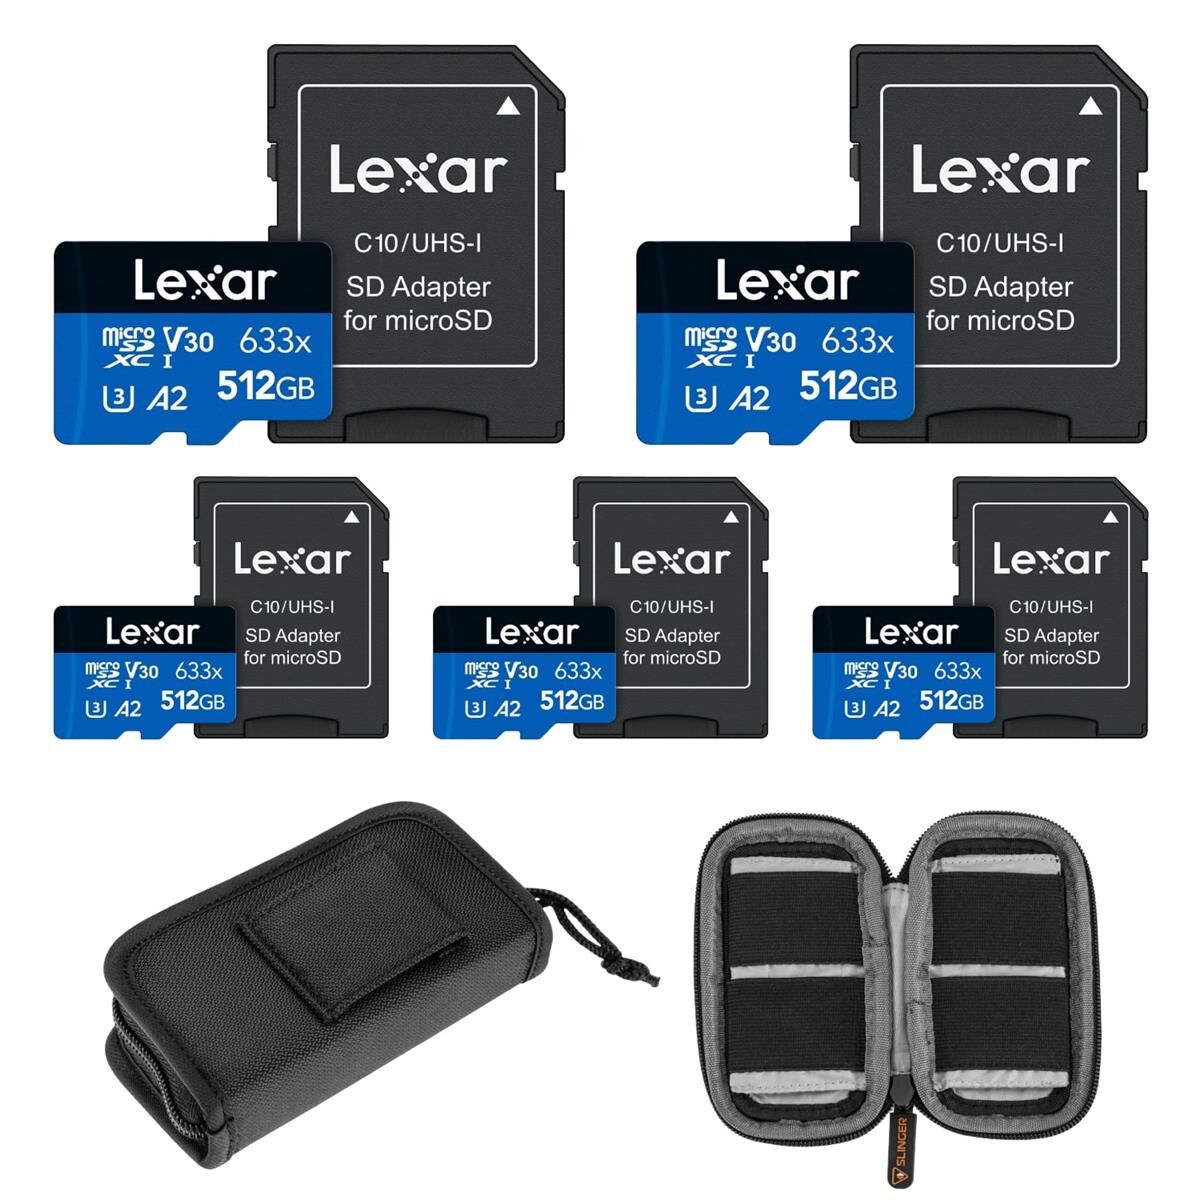 Lexar BLUE 512GB UHS-I microSDHC Memory Card w/SD Adapter, 5-PACK + Card Wallet